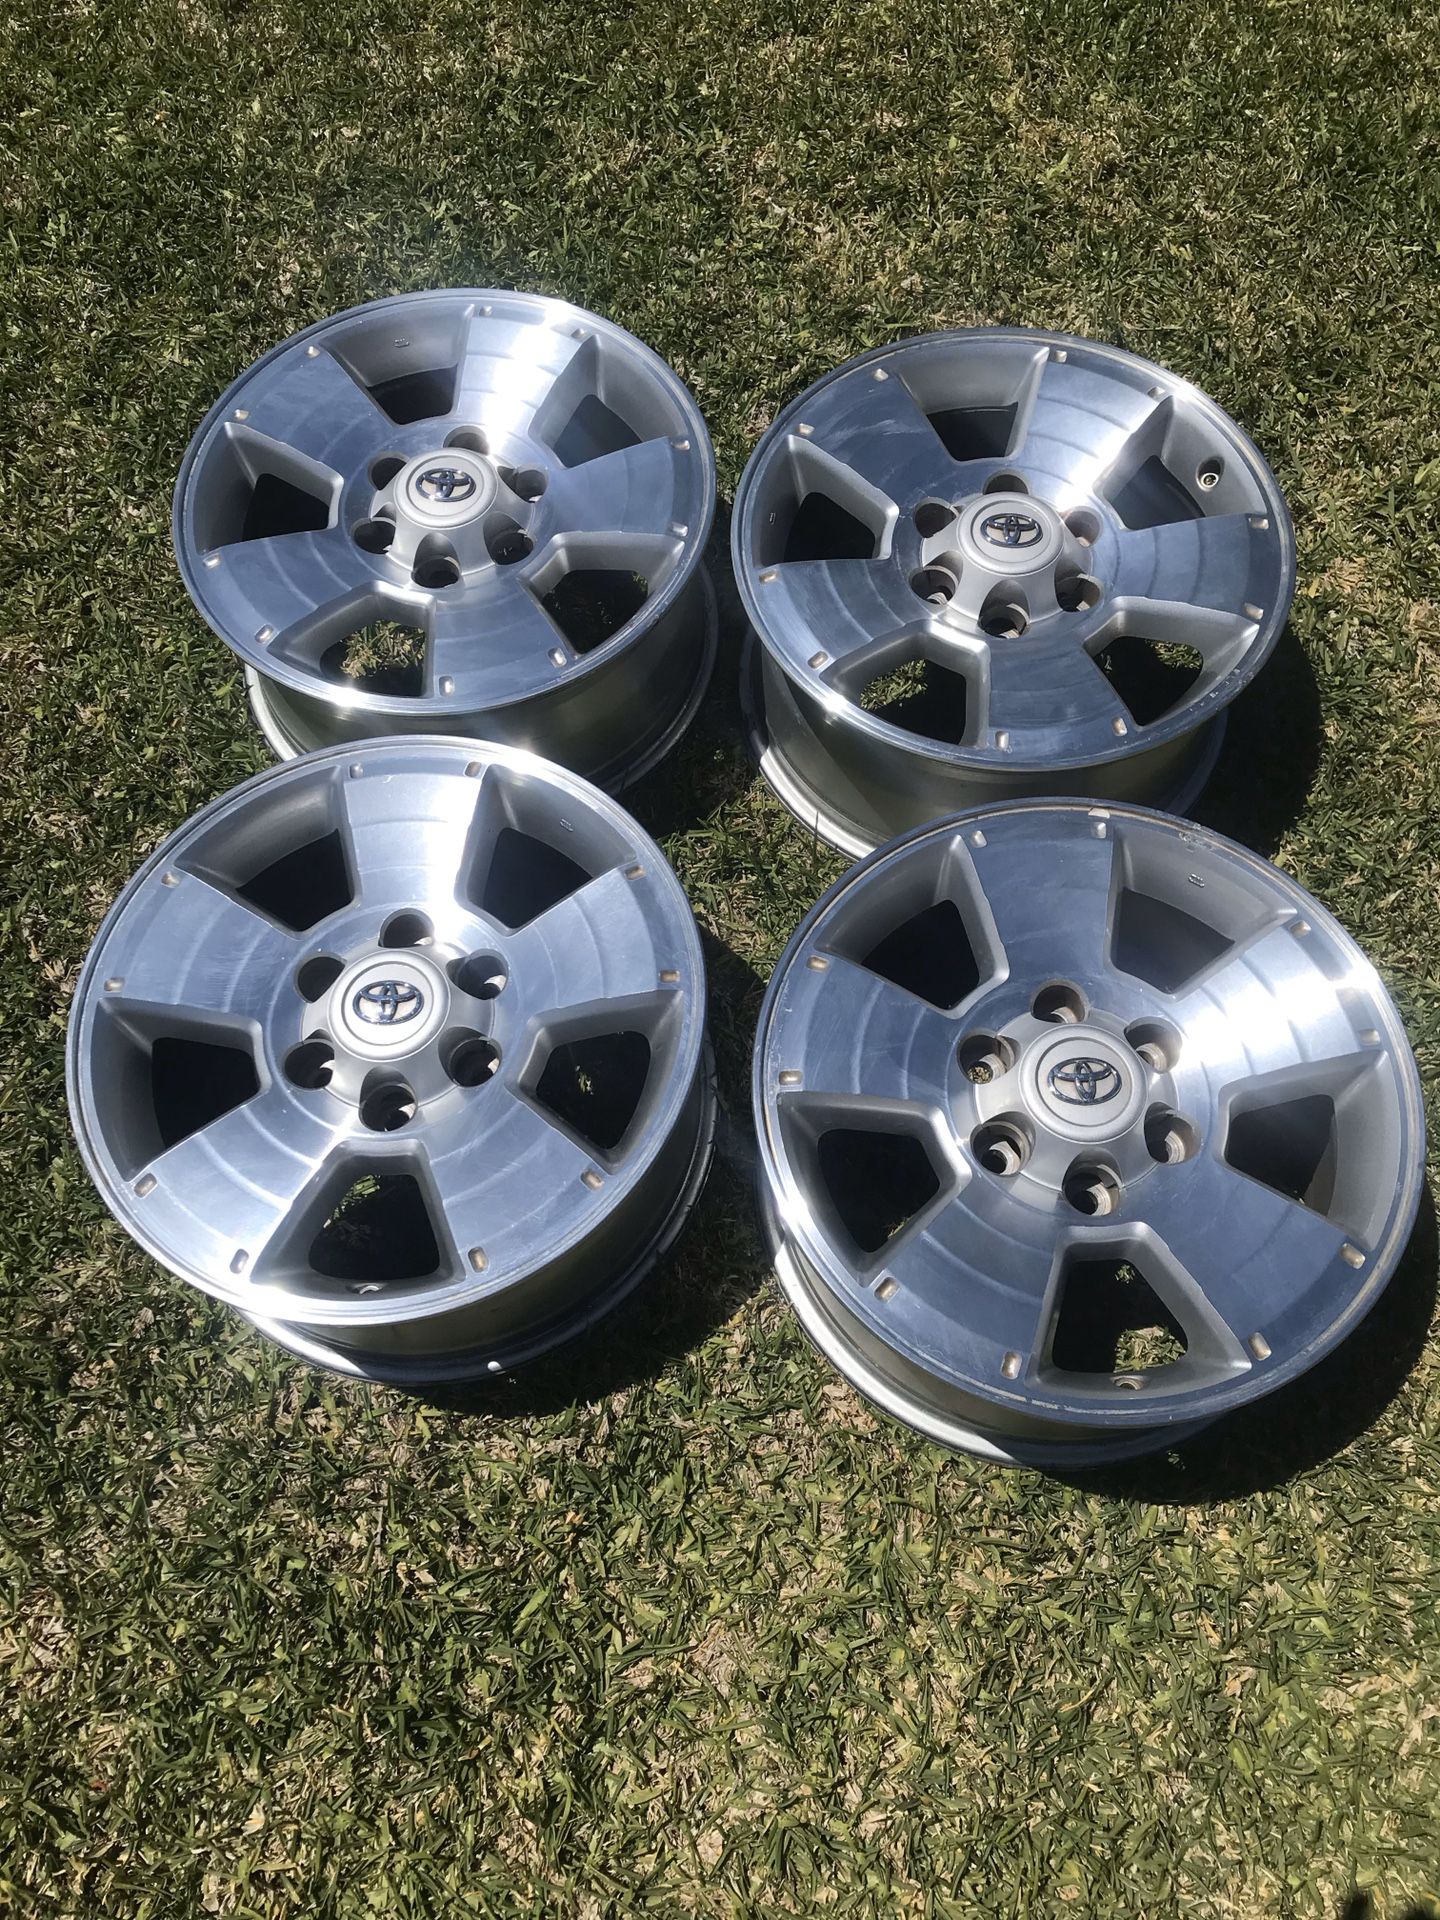 17 in TRD Rims off 2015 Toyota Tacoma lugs included